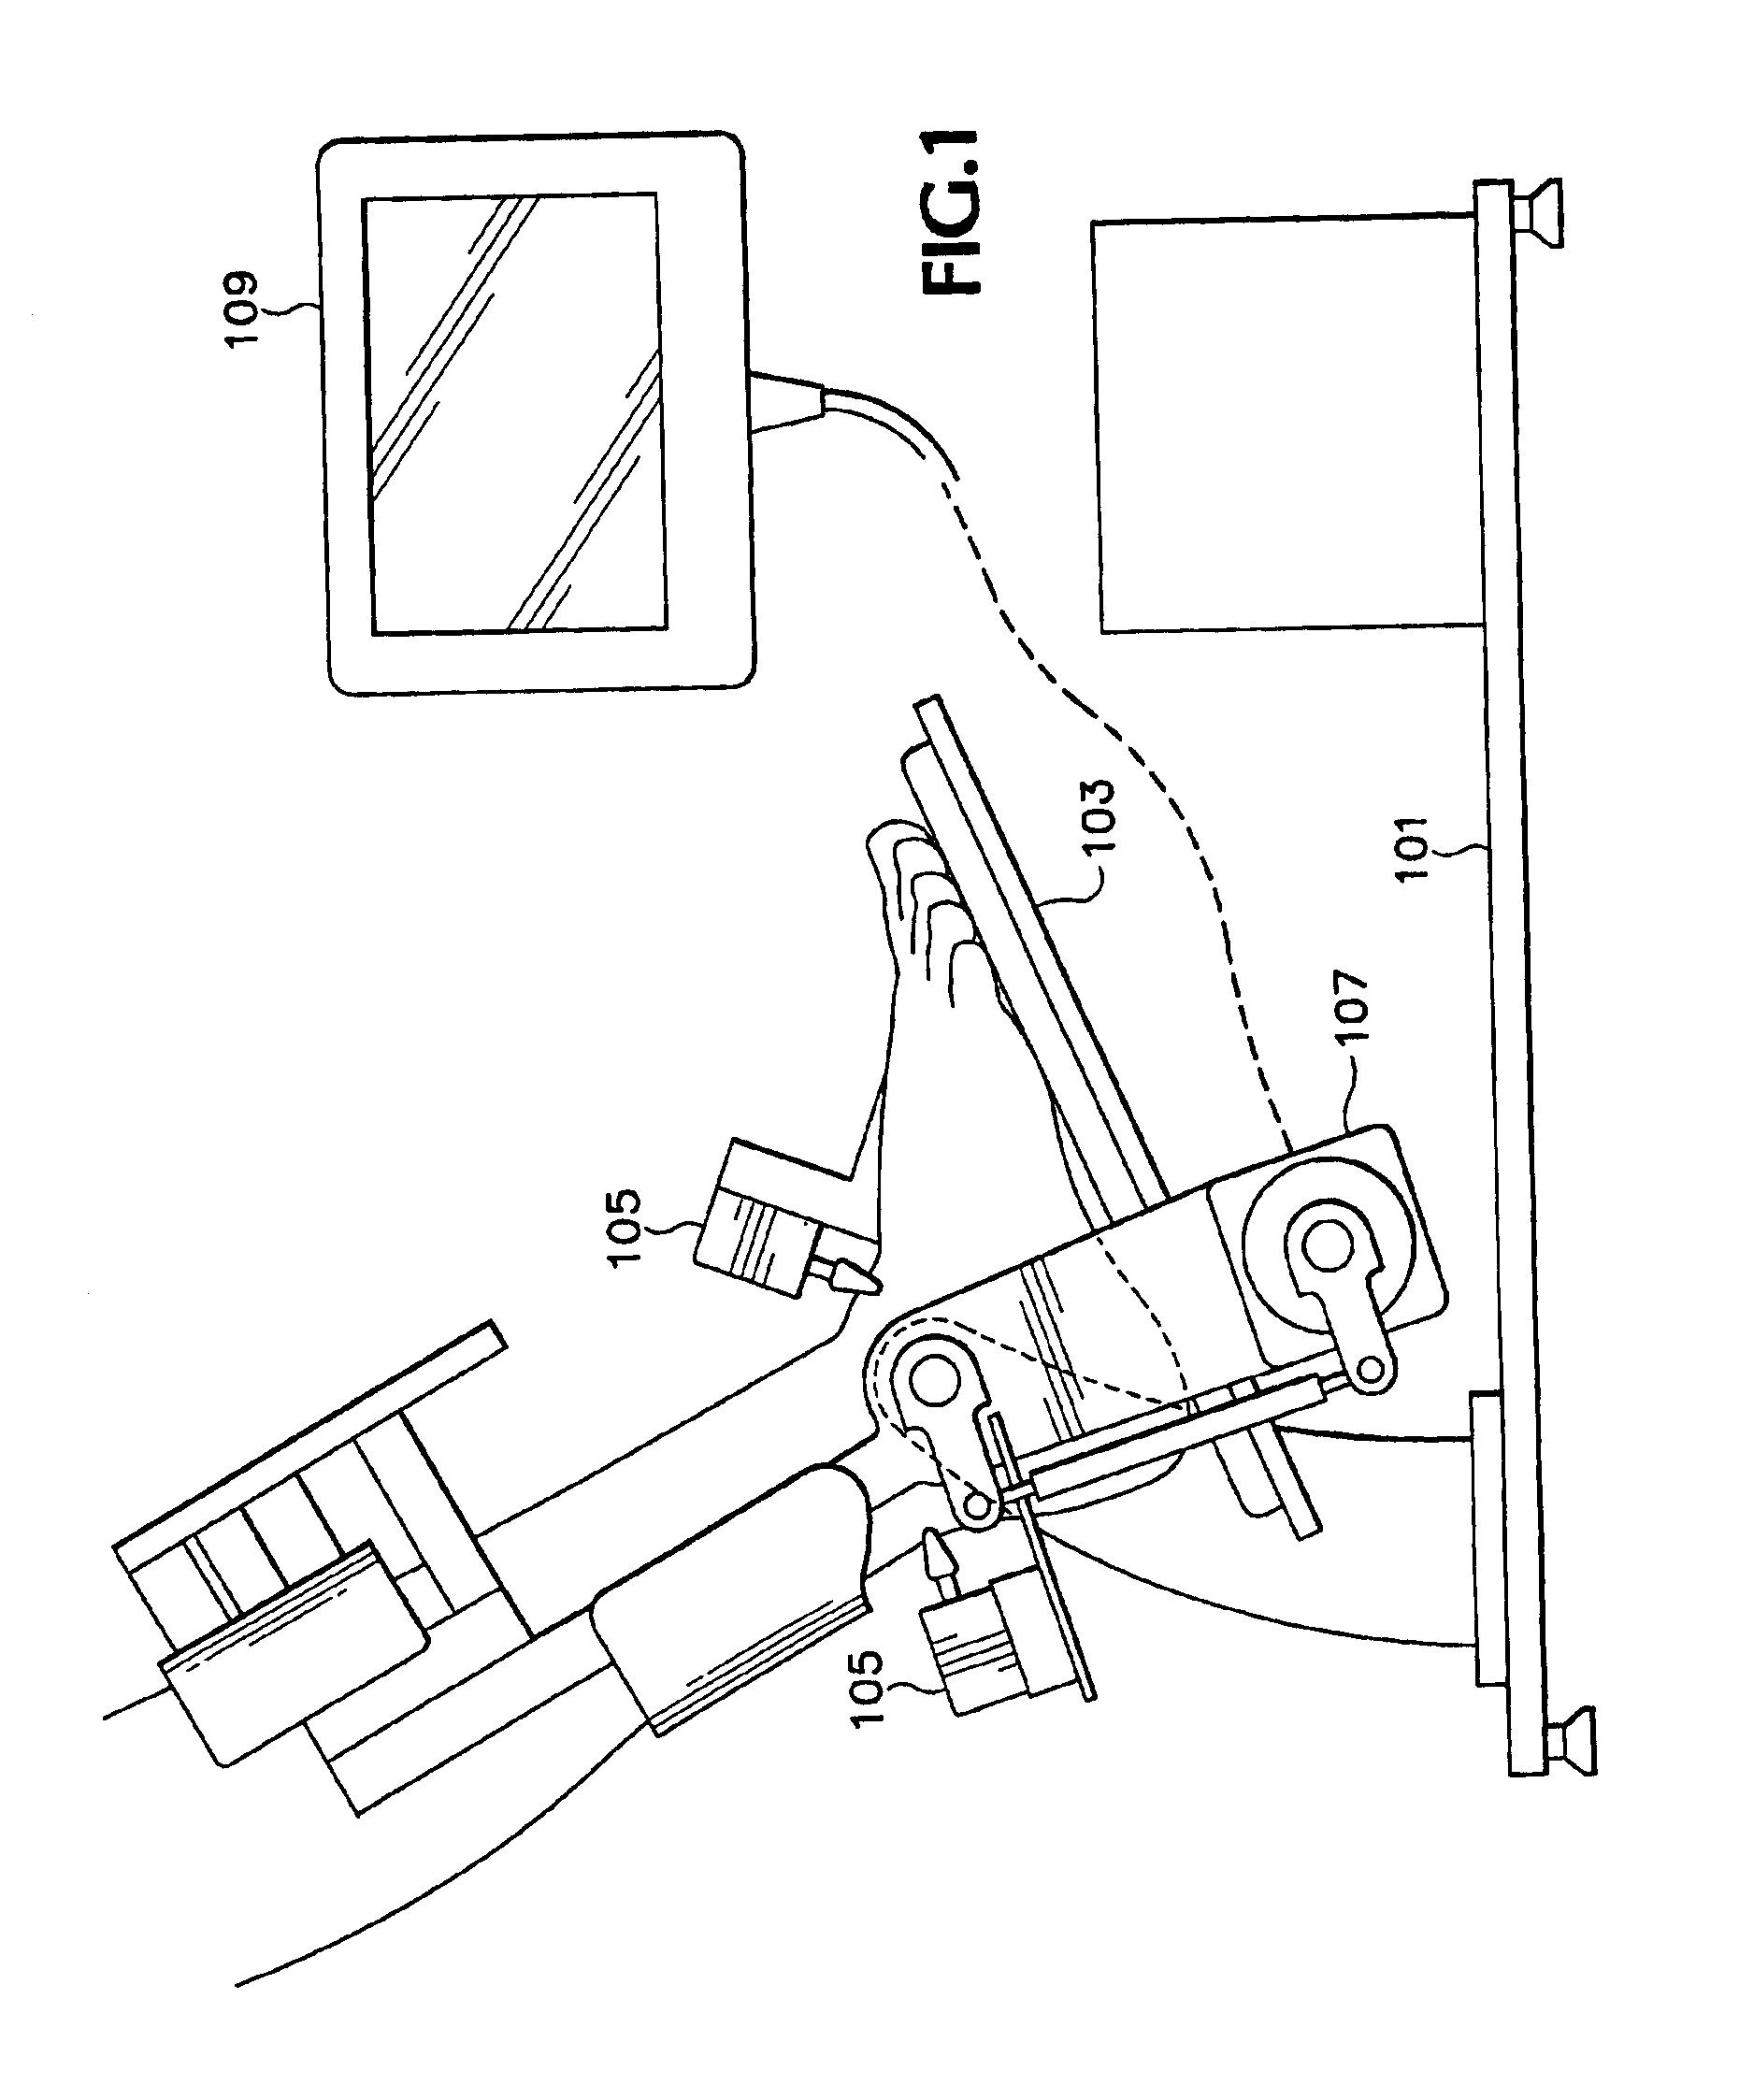 Method and device for rehabilitation of motor dysfunction